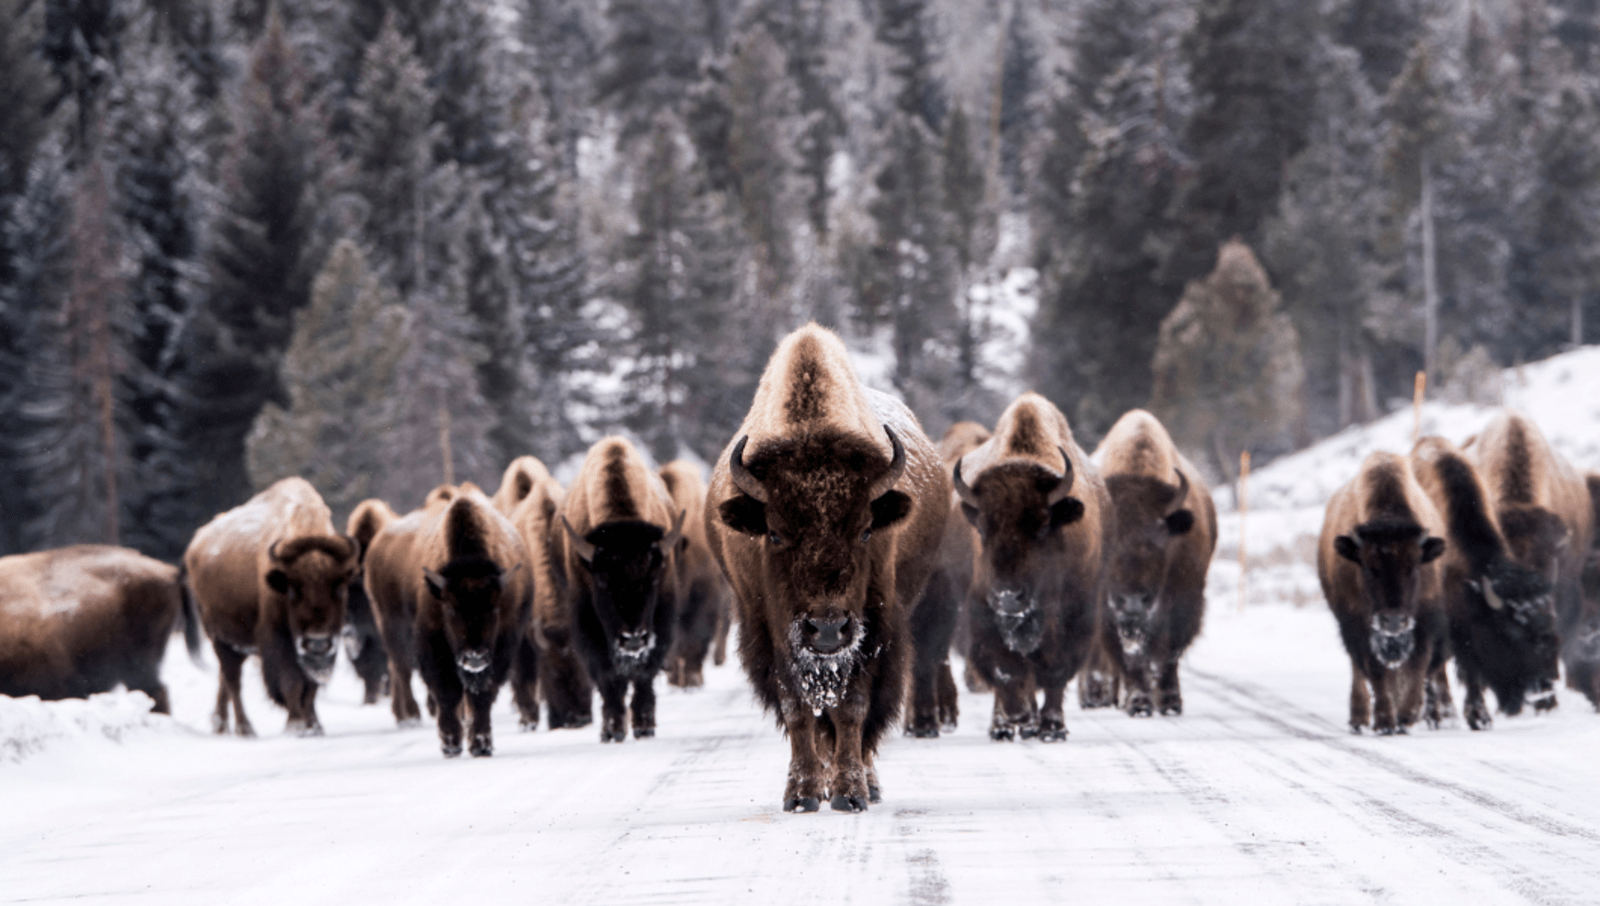 Bison walk on snow covered road with trees in background 